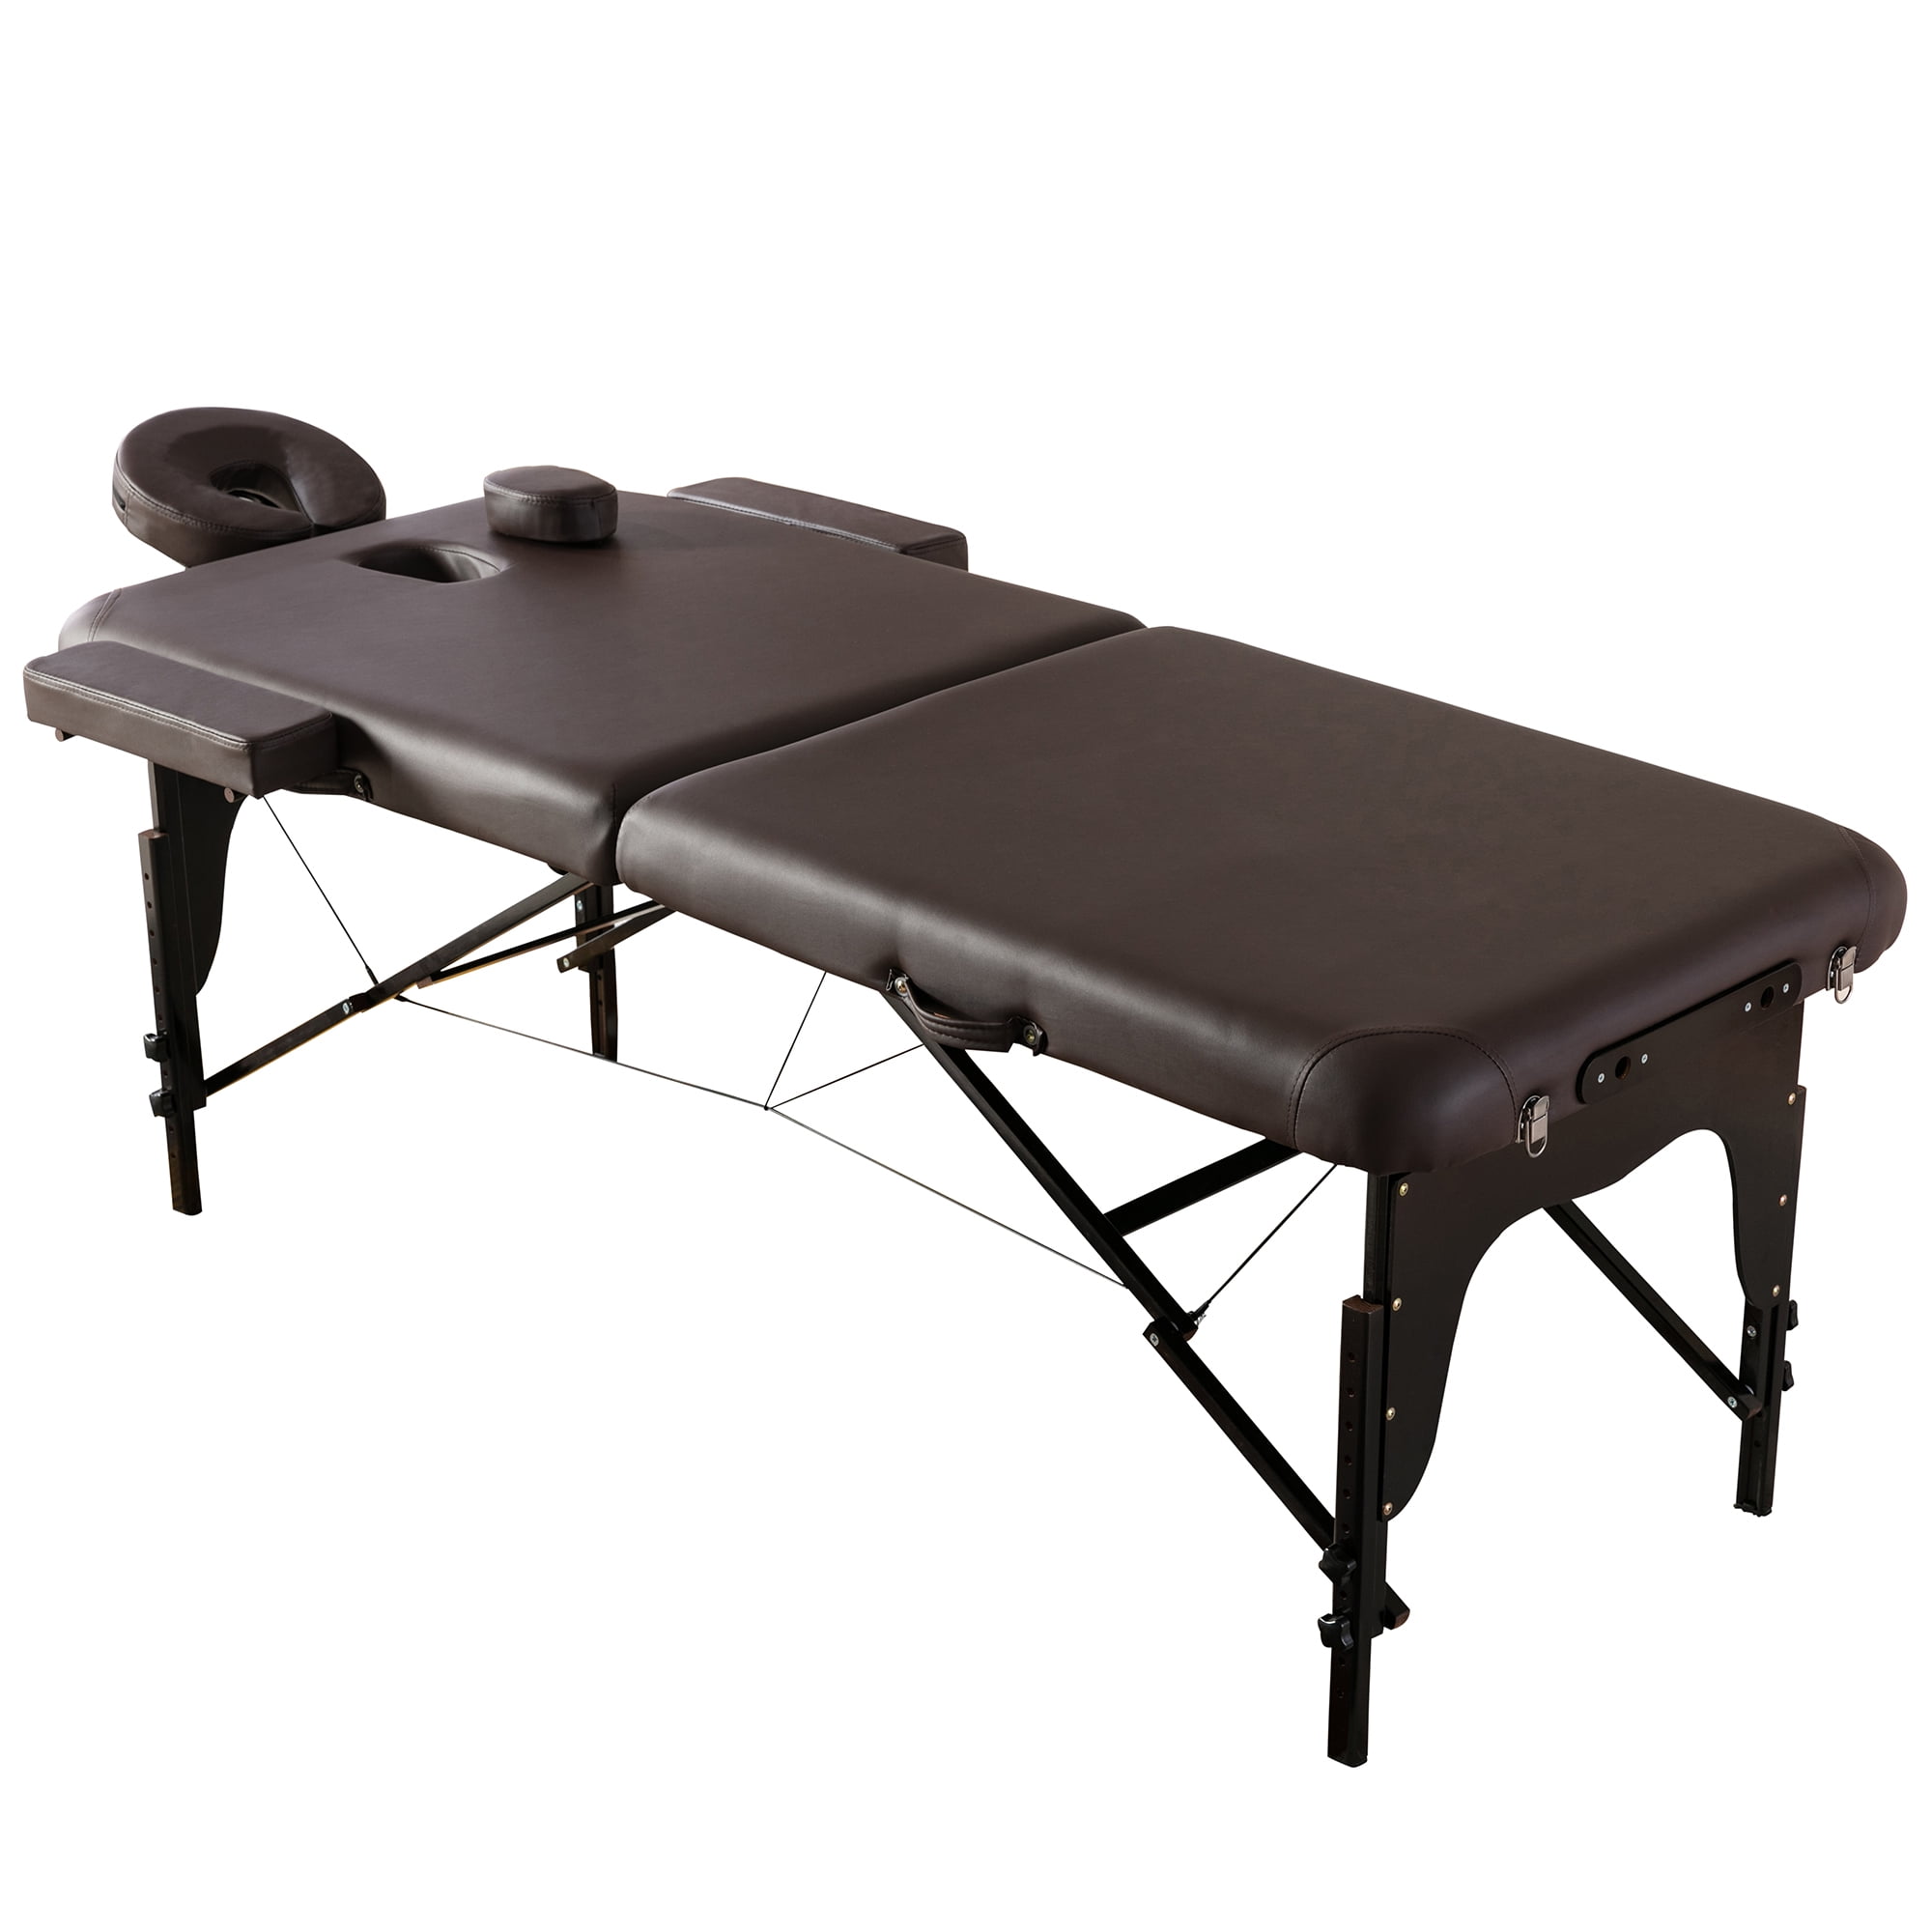 Anysun Portable Table Massage SPA Bed Height Adjustable 2 Fold 84" Long 38" Wide PU Salon Deluxe Backpack Reiki